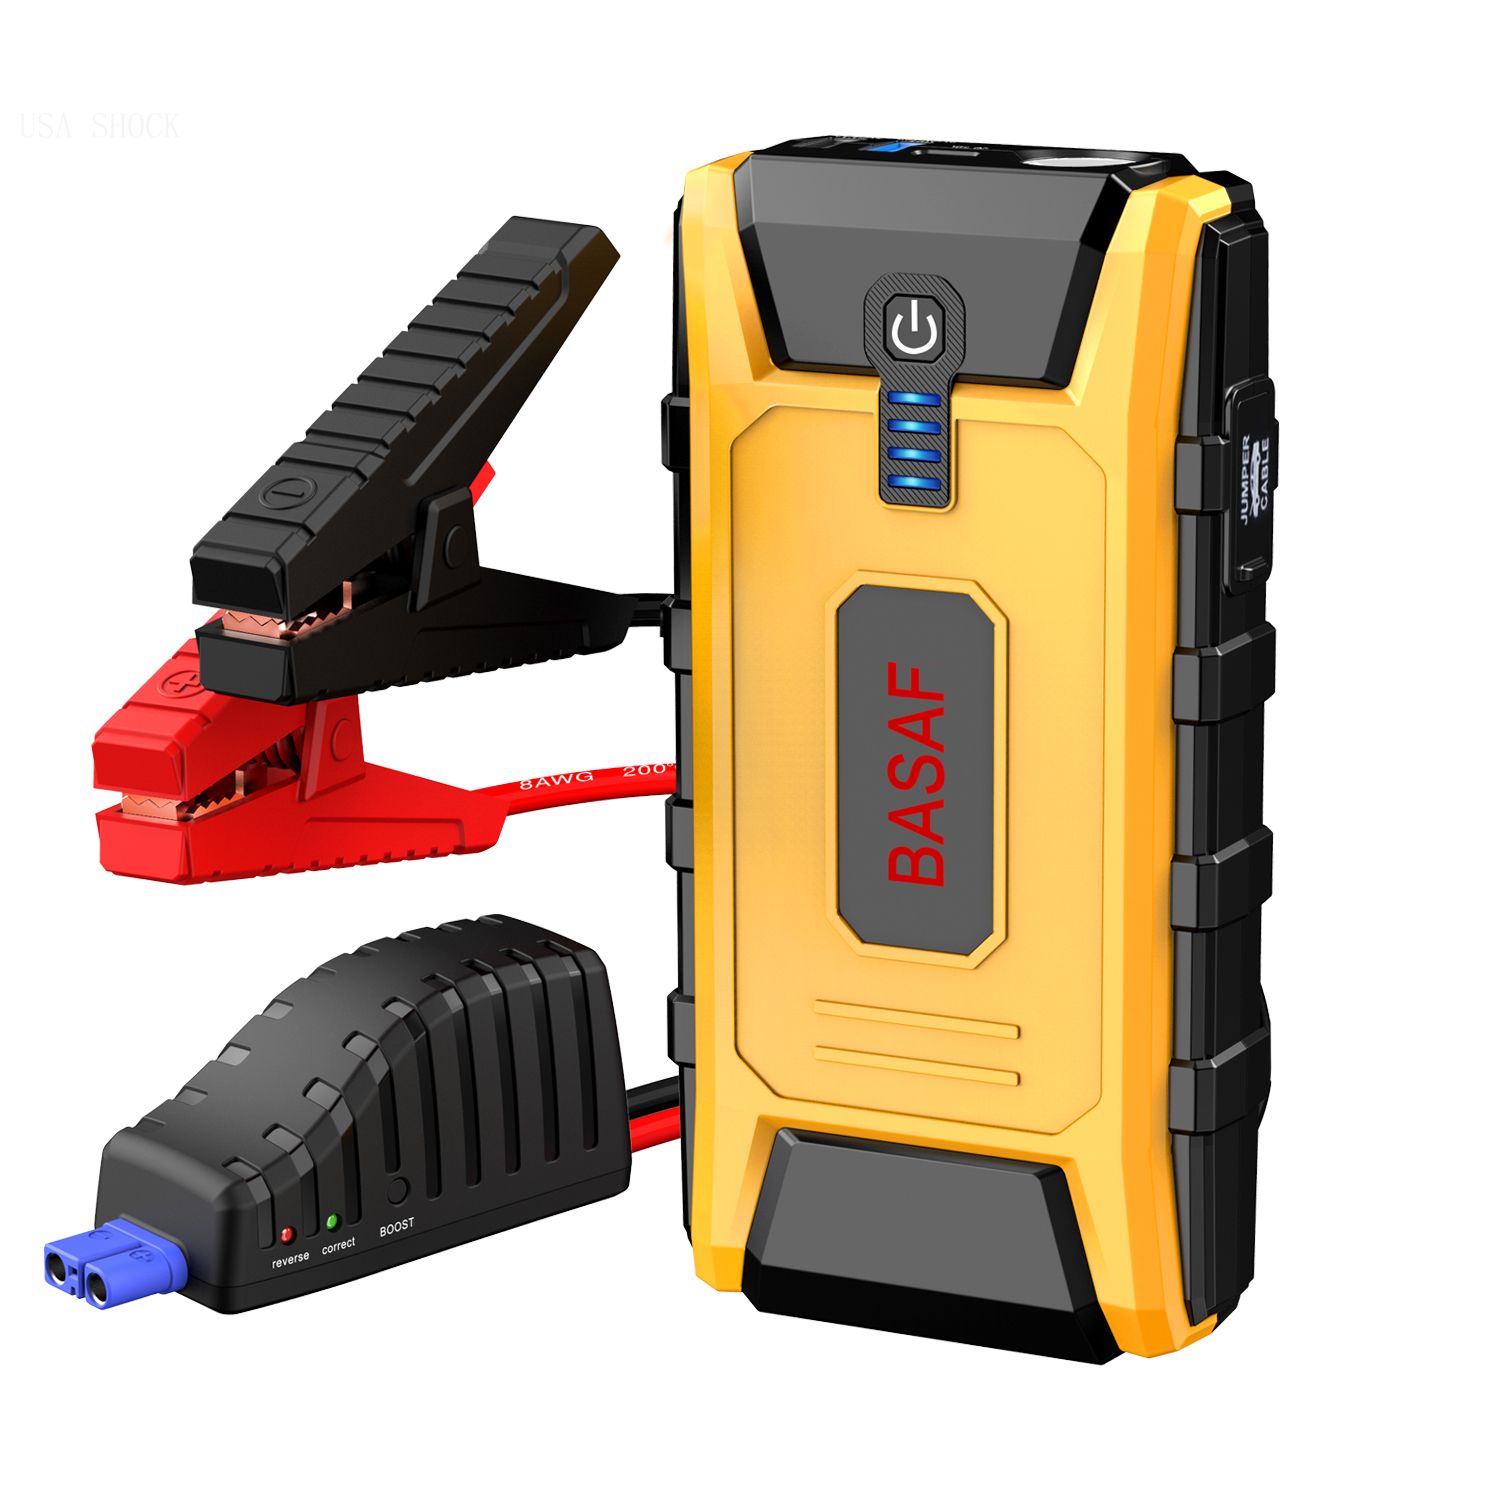 BASAF Car Jump Starter 1500A Peak All gas, up to 6.5L diesel engine Quick Charge 3.0 Type-C Power Bank 12V Lithium Jump Pack Portable Battery Booster 